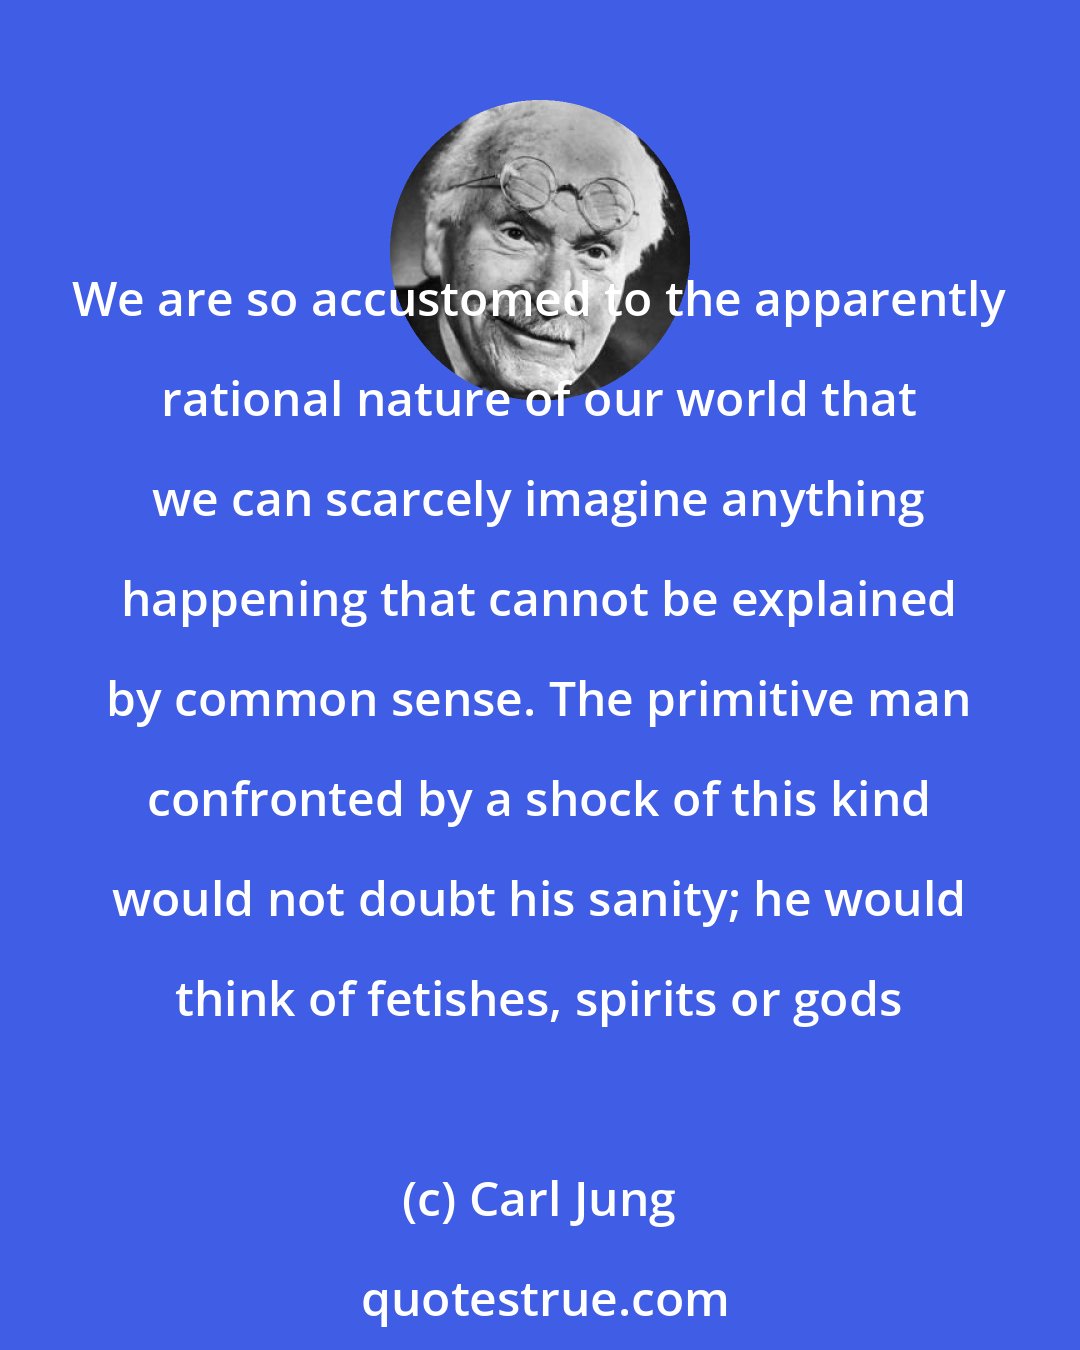 Carl Jung: We are so accustomed to the apparently rational nature of our world that we can scarcely imagine anything happening that cannot be explained by common sense. The primitive man confronted by a shock of this kind would not doubt his sanity; he would think of fetishes, spirits or gods